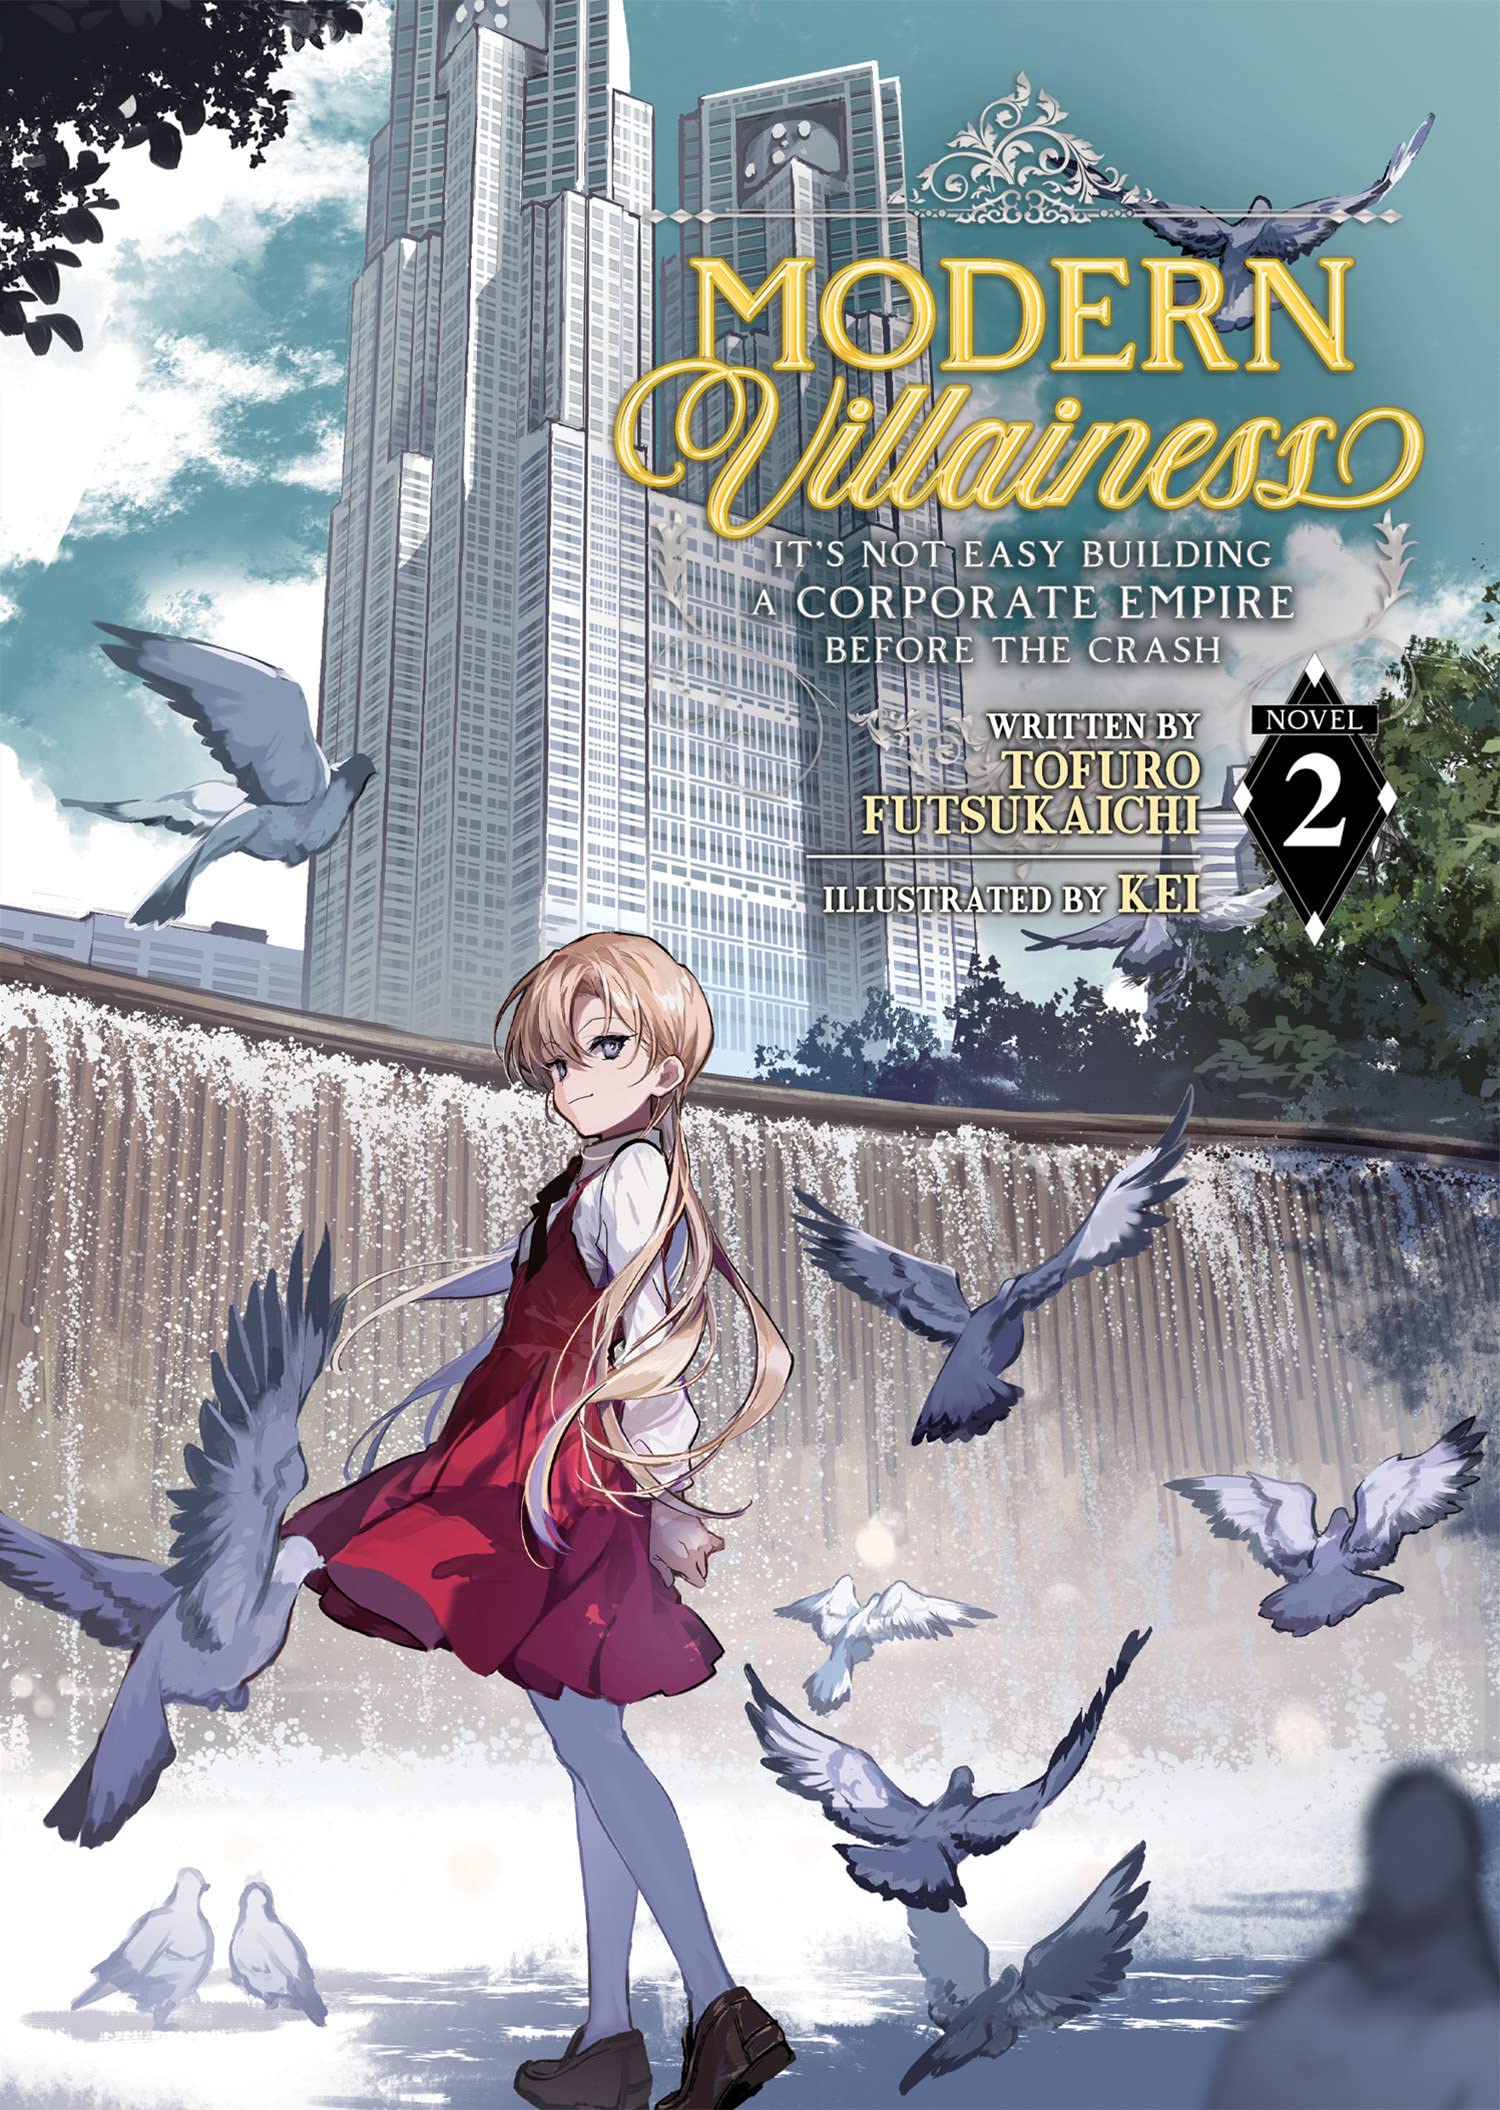 Modern Villainess: It's Not Easy Building a Corporate Empire Before the Crash (Light Novel) Vol. 02